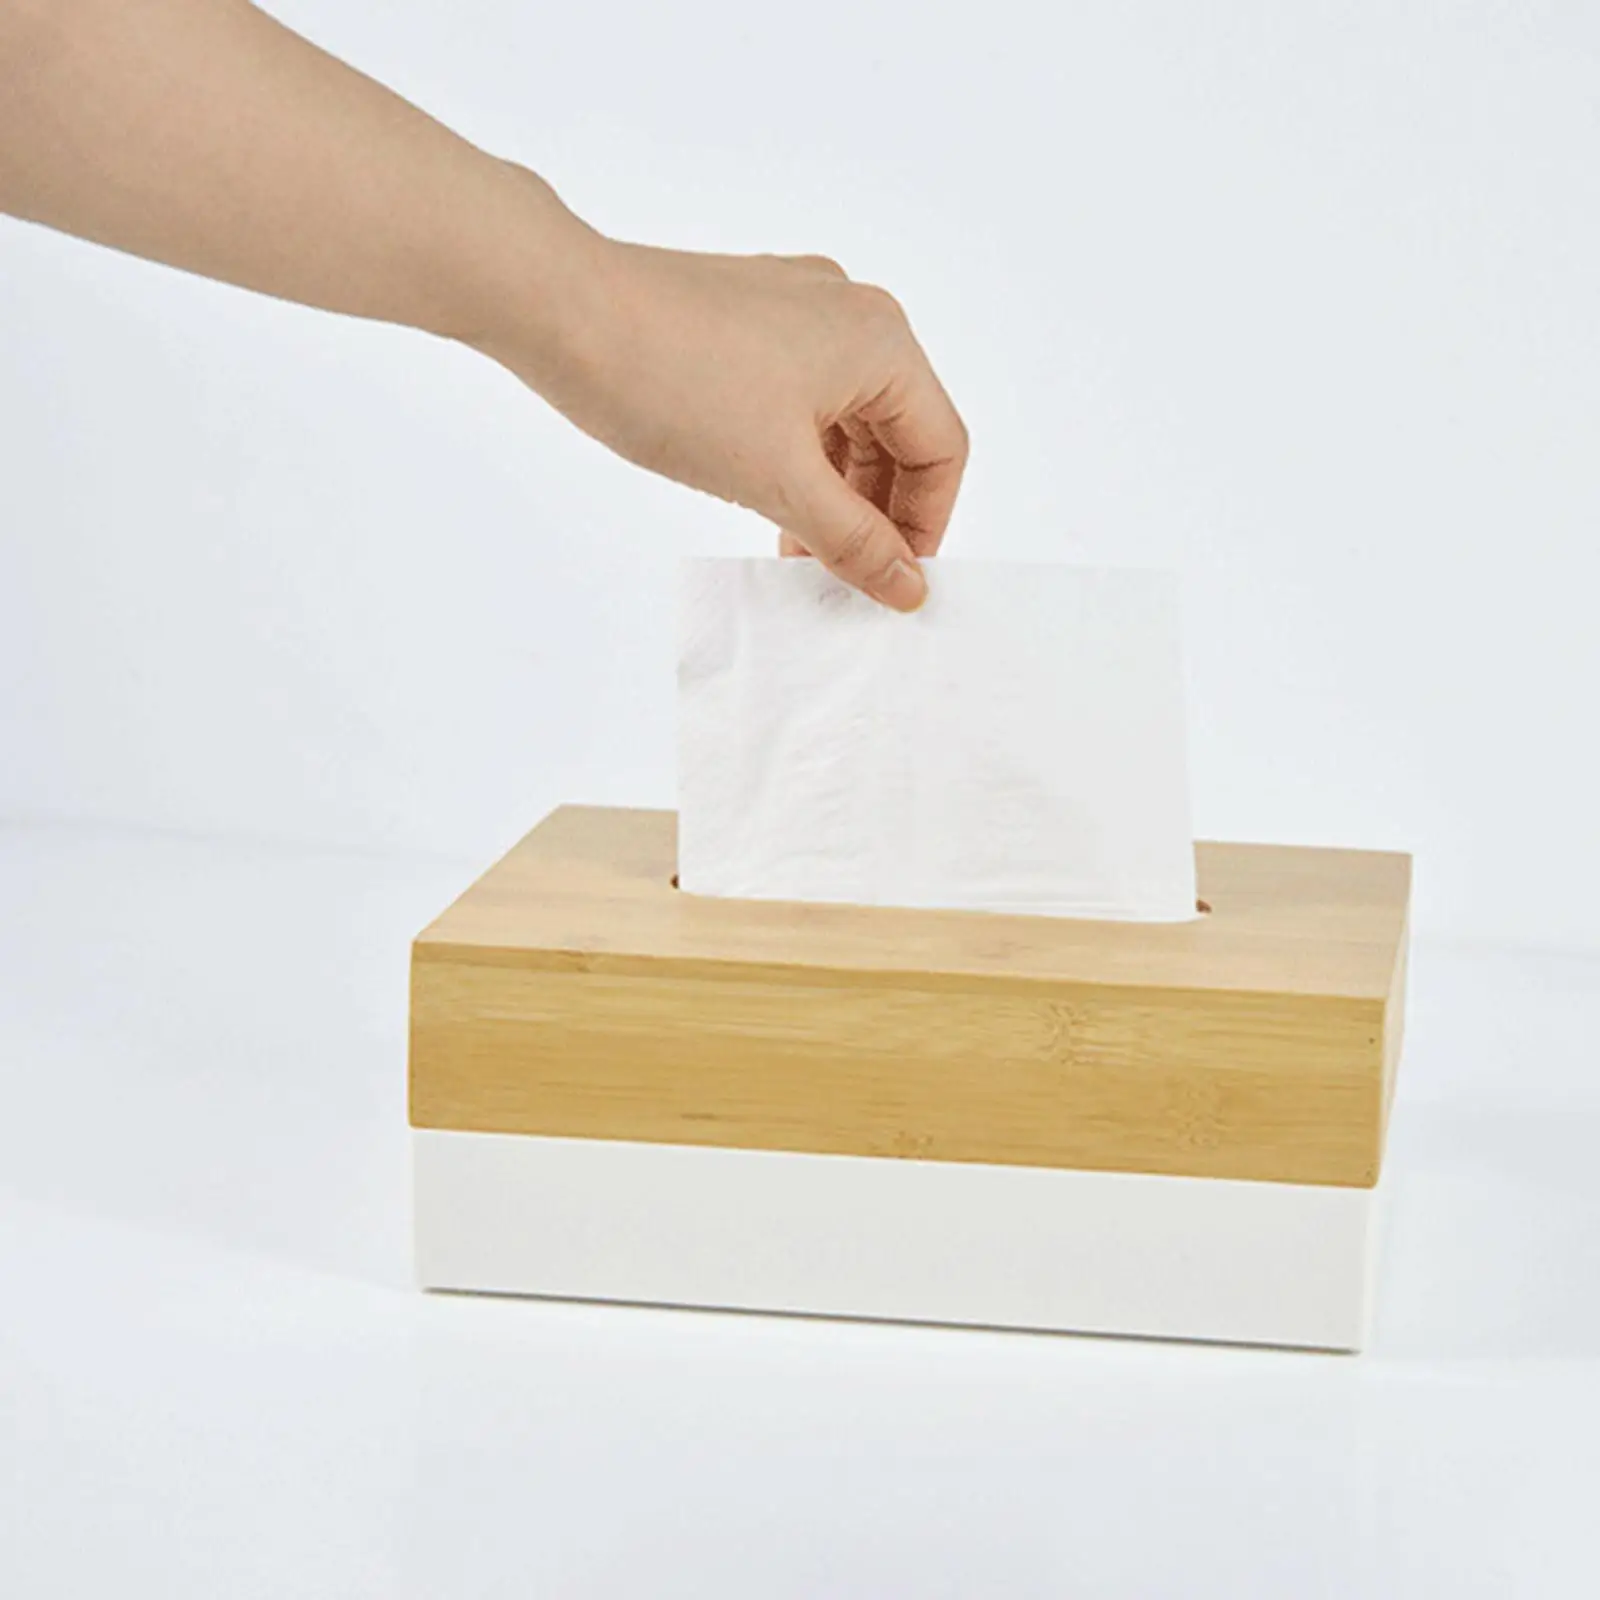 Tissue Box Removable Cover Facial Tissue Holder Portable Simple Table Napkin Box for Bathroom Dining Room Tabletop Bedroom Cafe